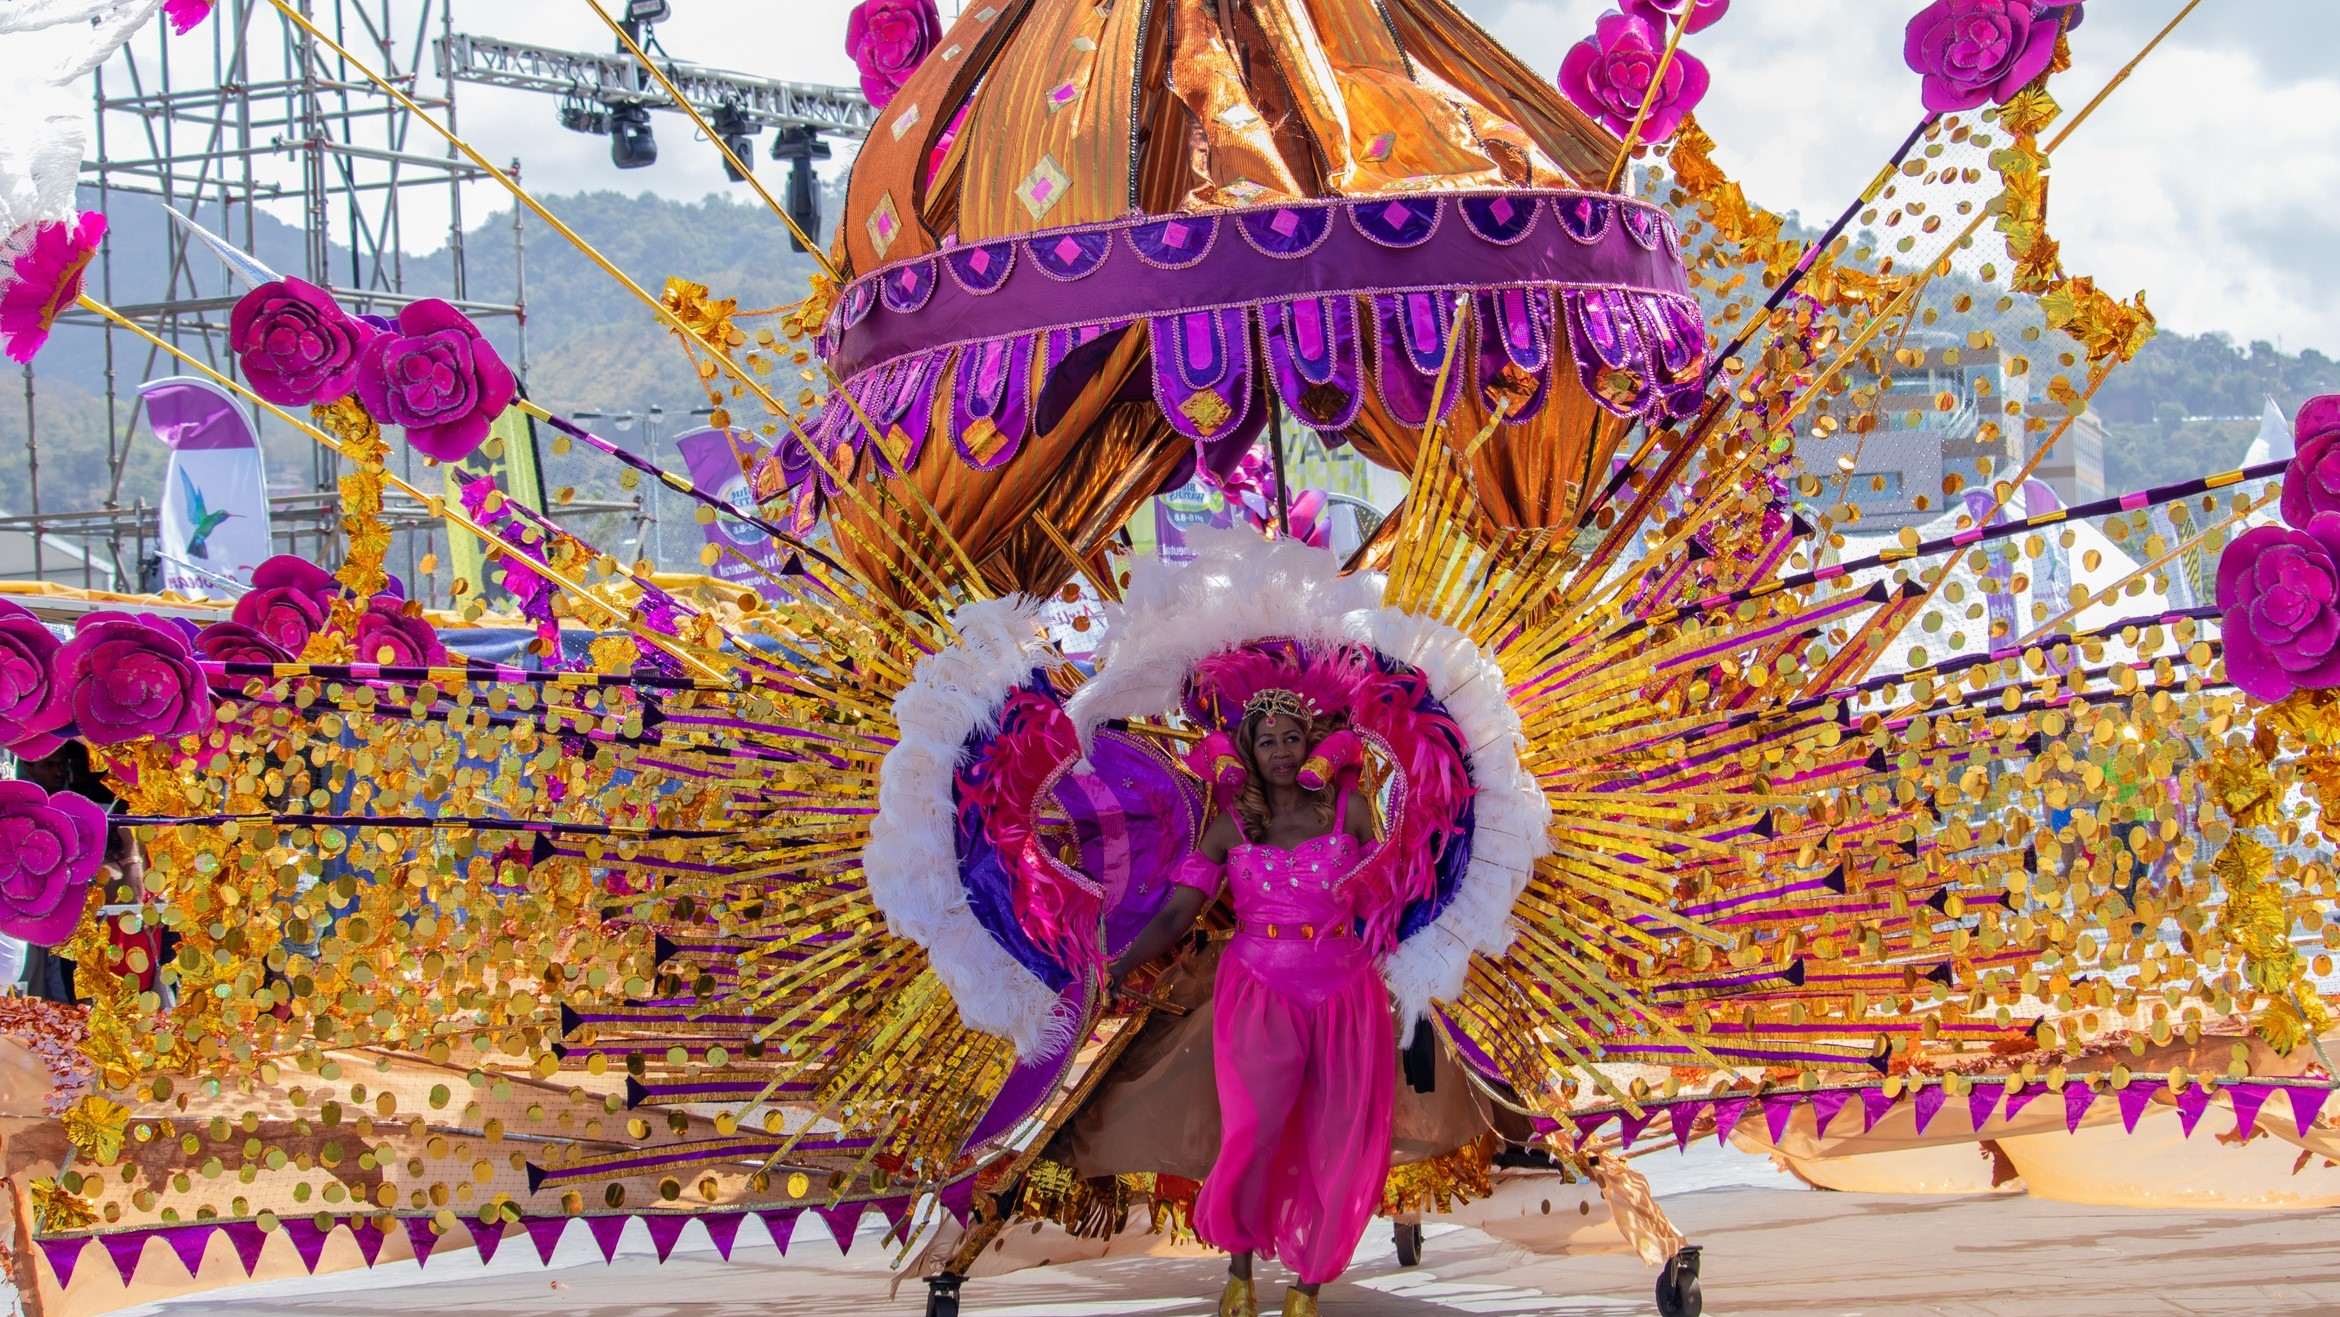 3 things about T&T Carnival that you probably didn't know (or forgot)